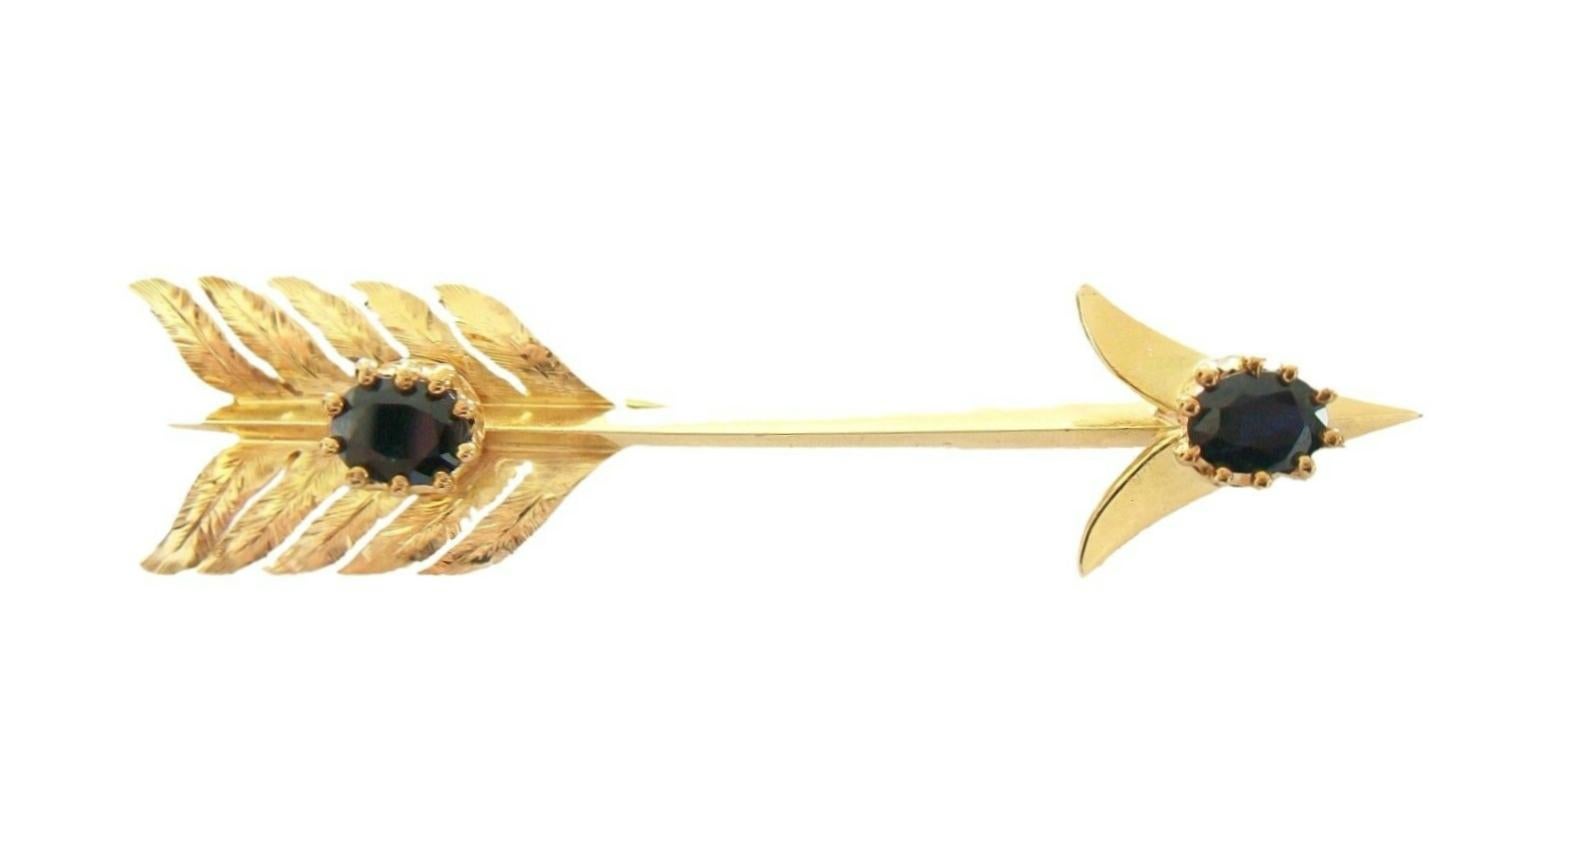 ELLIS BROS. LTD. - Antique hand-made 18K solid yellow gold arrow brooch - impressive size set with two oval cut natural black/blue Spinel (approx. .42 carats each - 5 x 4 x 3 mm.) - finely chased details to the 'feathers' - hand-made double pin and